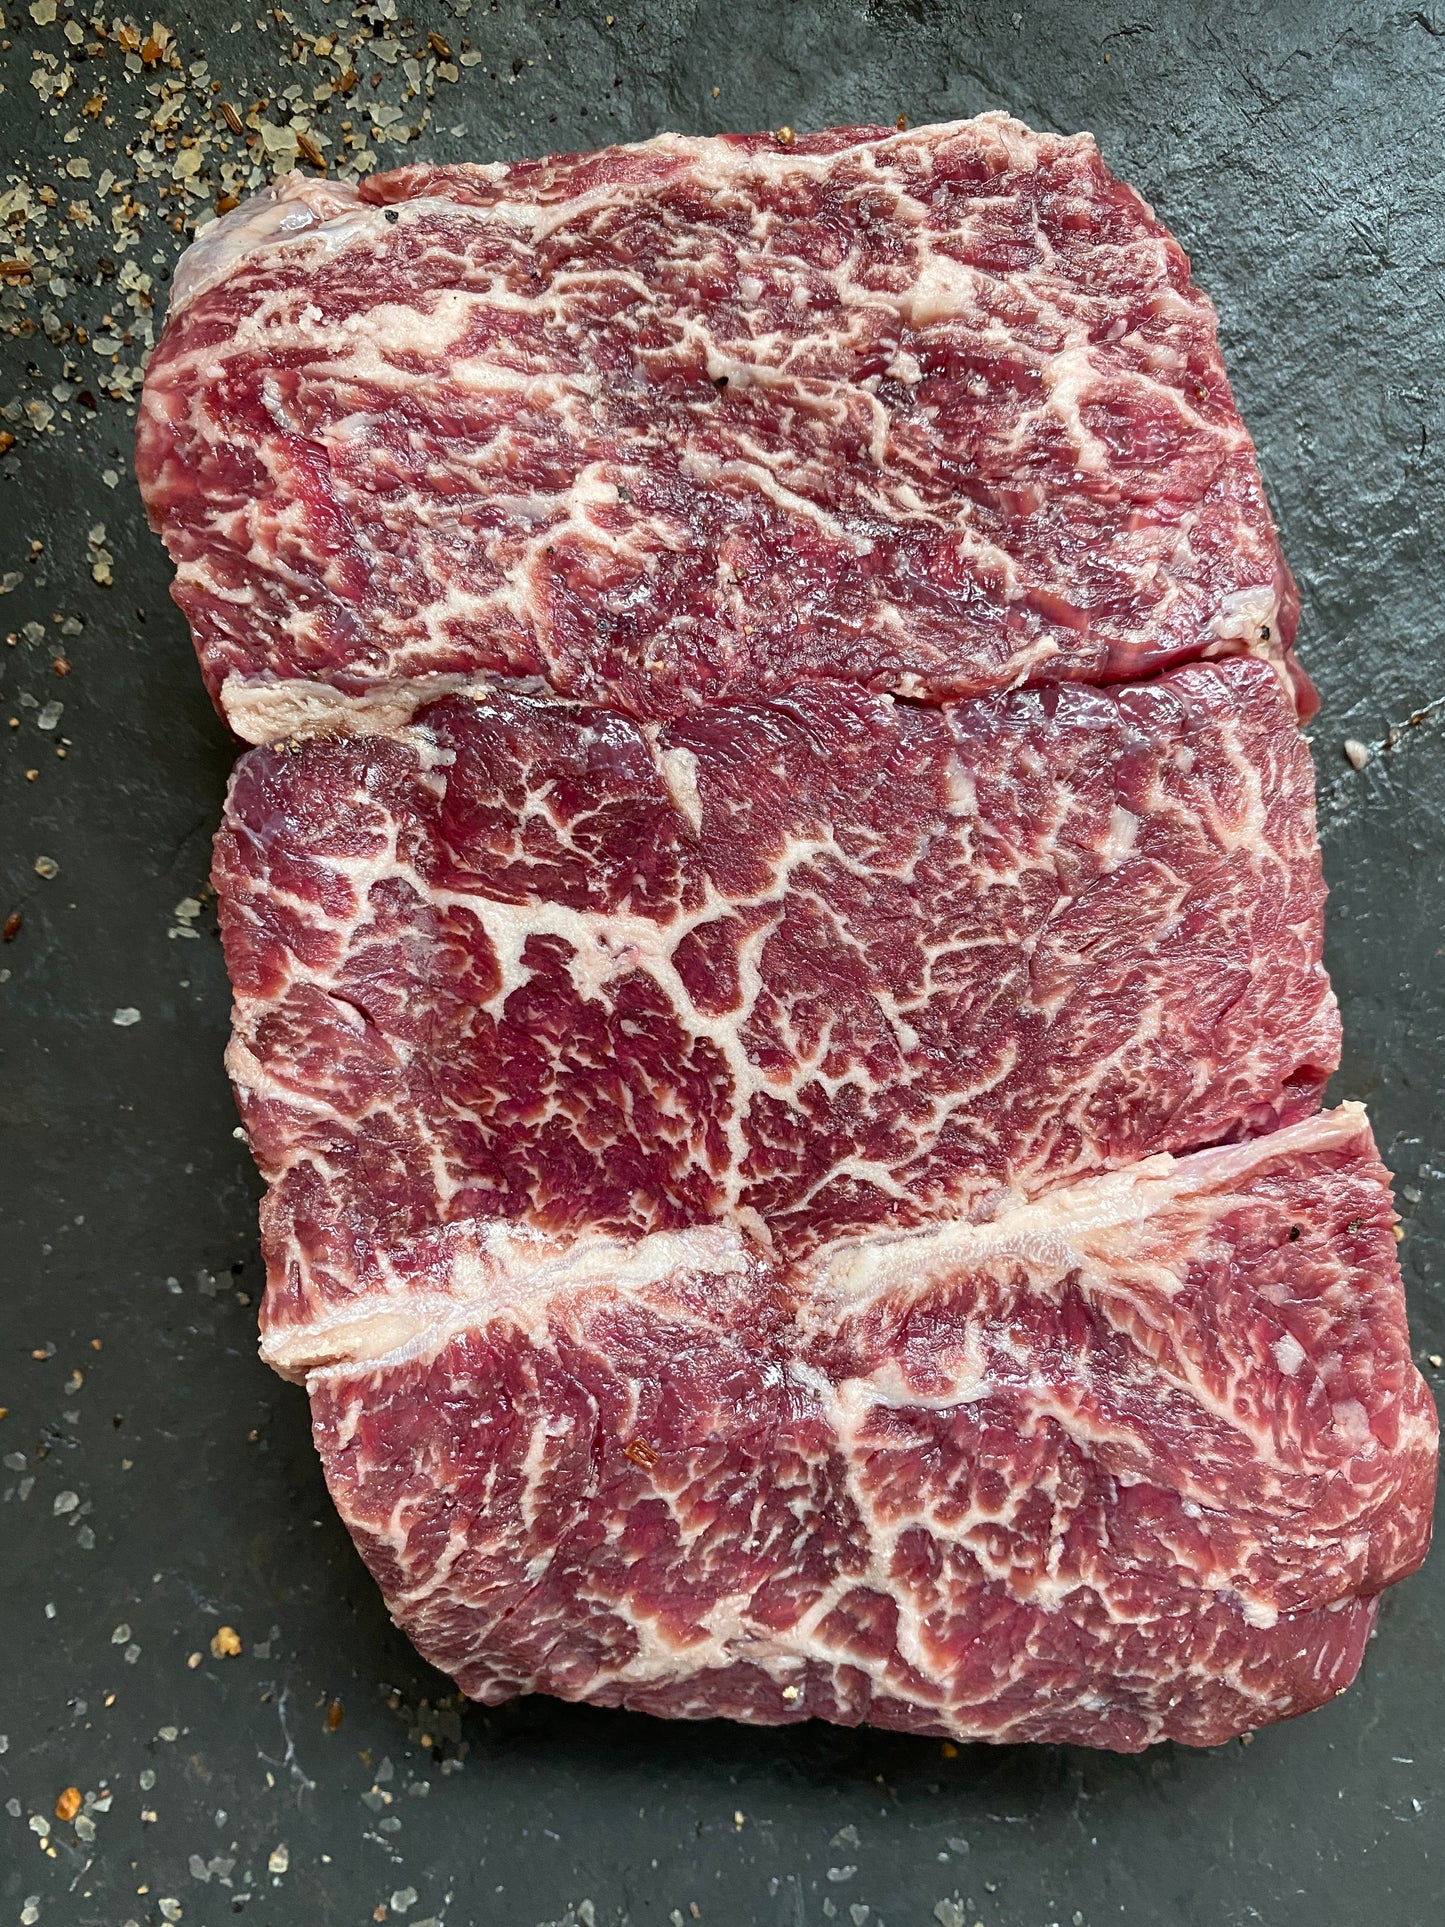 SCF Monthly Special -American Wagyu